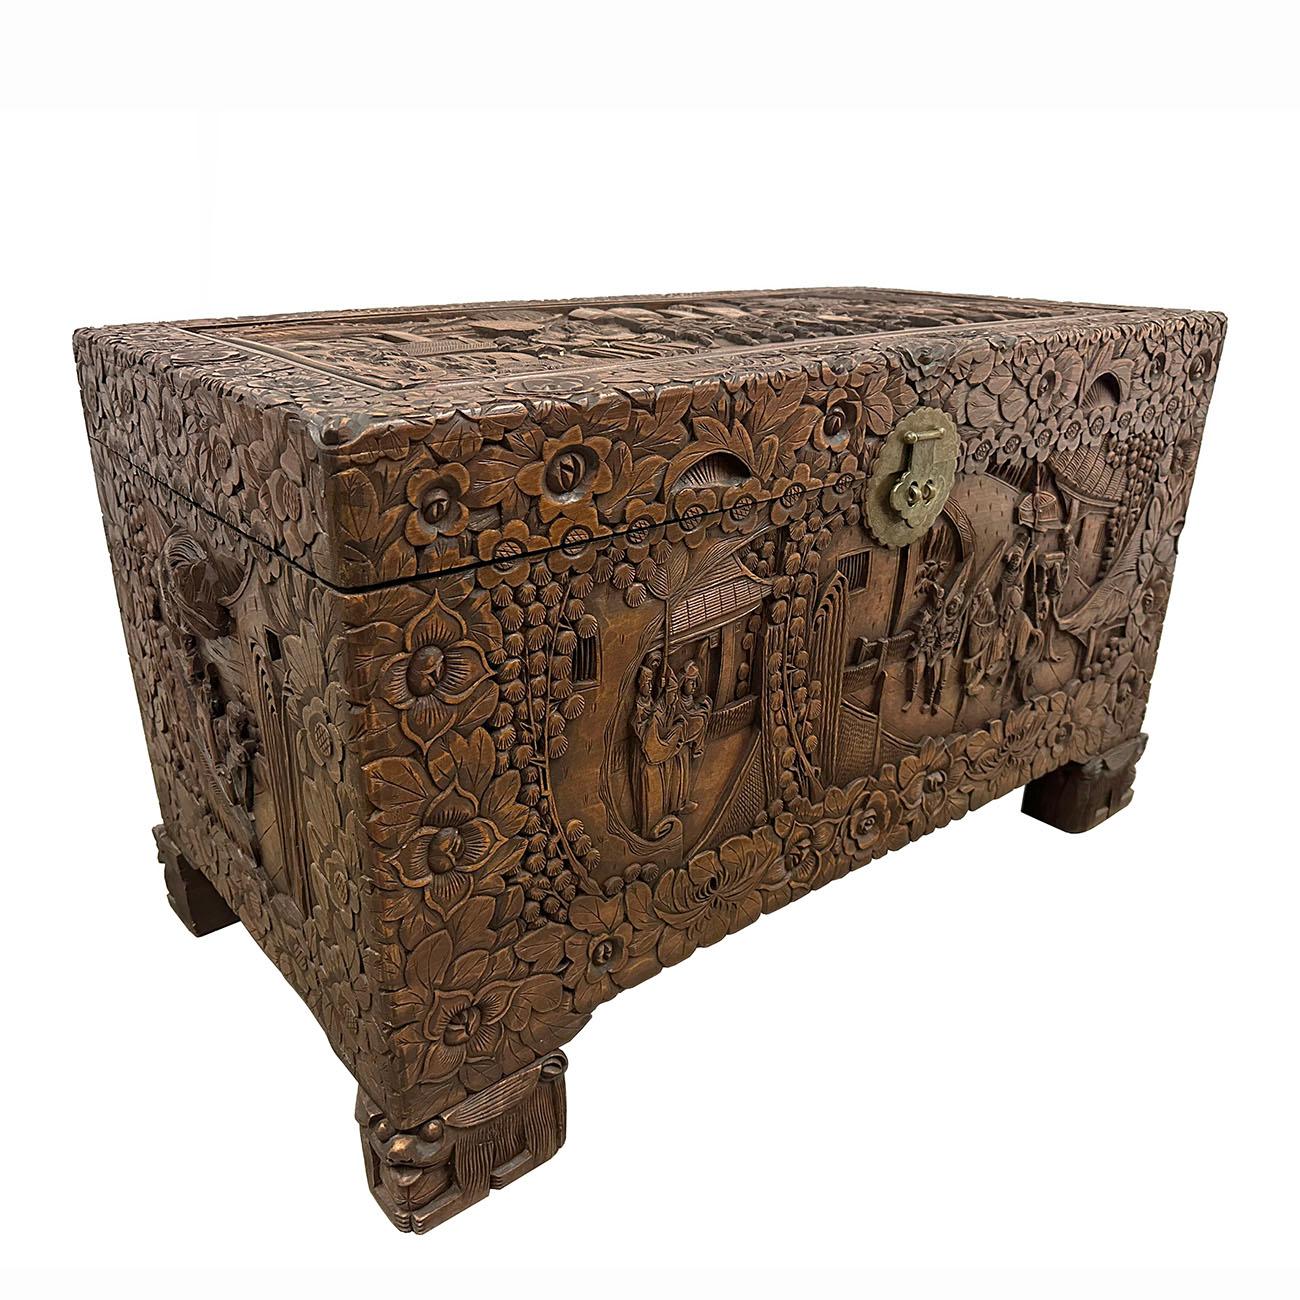 This is a traditional style of Chinese antique massive carved Camphor chest/trunk from China. Very well constructed with a lot of brass angle inside chest to reinforce the joint. It was sailor's hope chest with all the sailor's best wishes and hopes